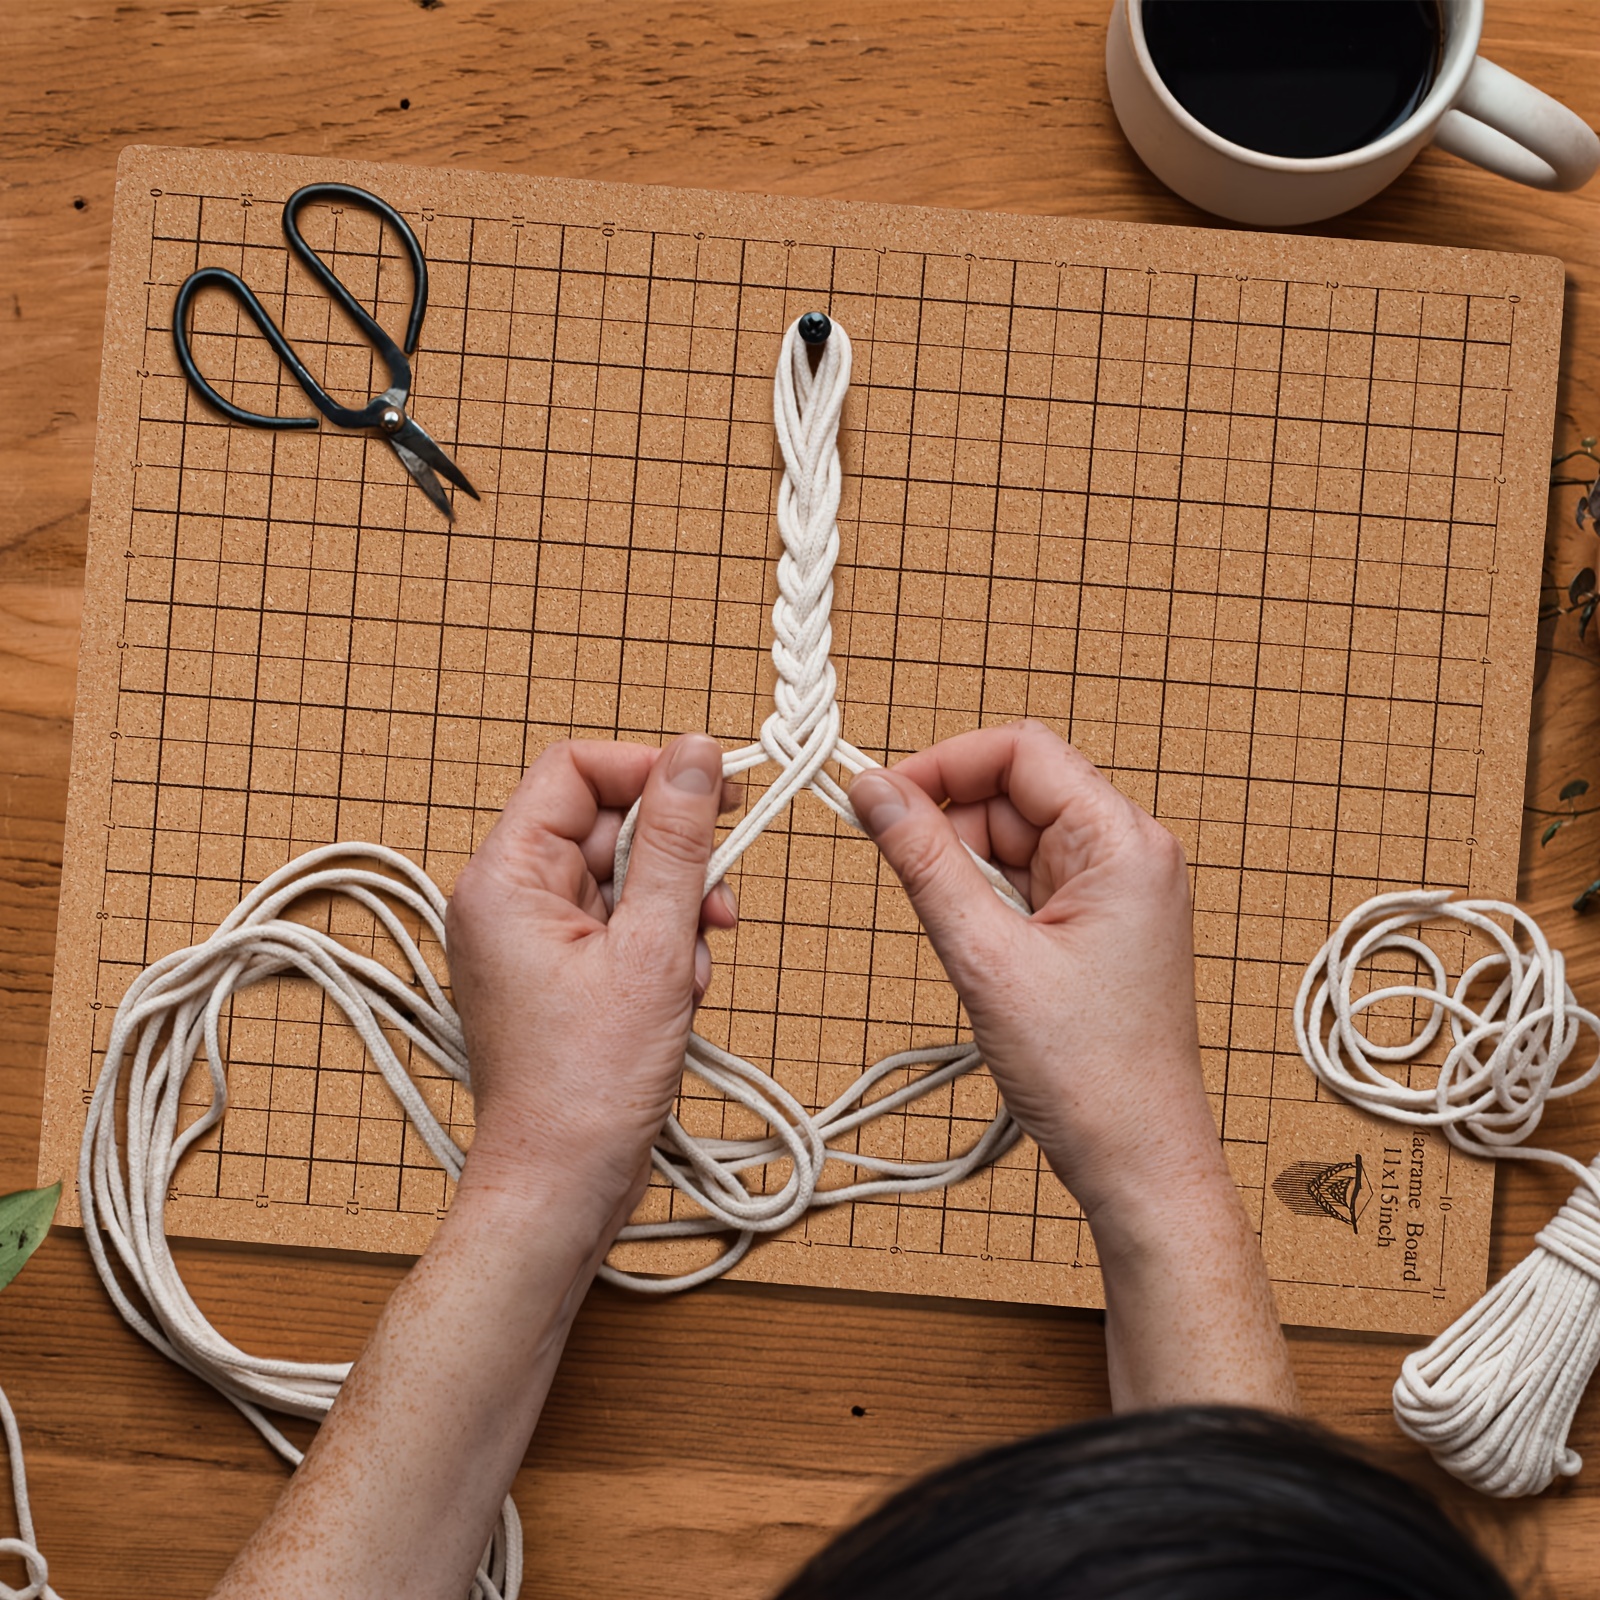 How to Make a Macrame Board for $15 - FeltMagnet